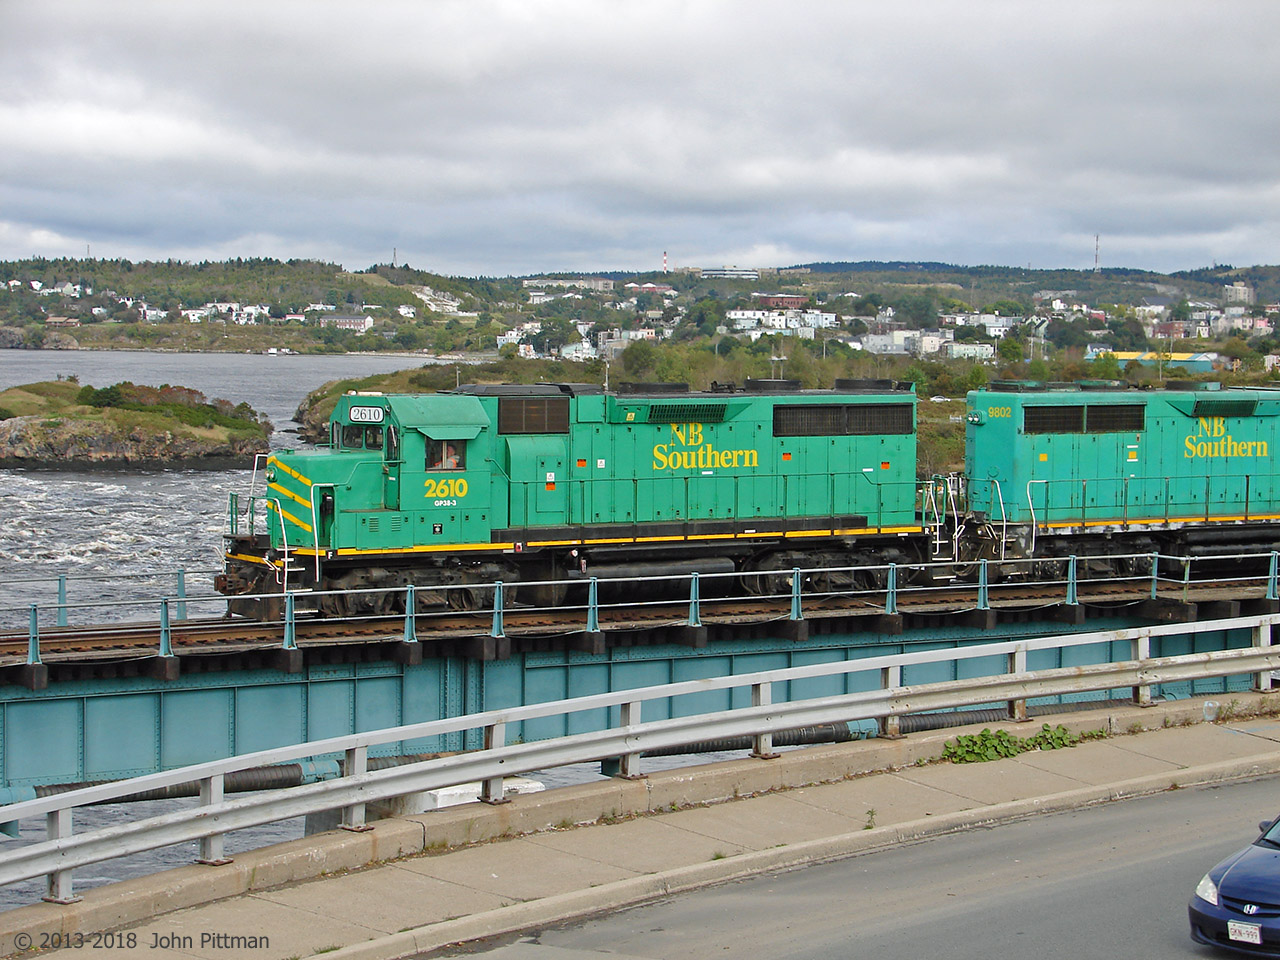 New Brunswick Southern GP38-3 units 2610 and 9802 lead a freight train west over the ex-CP bridge that crosses the lower St John River. The engines are just beyond the girder truss section. Vantage point is the St John NB information centre building near the Reversing Falls viewpoint. 
NBSR 2610 was built by EMD in 1965 as GP35 SP 7768. It was upgraded into a "GP38-3", losing its turbocharger and middle radiator fan, presumably converted from 567 to 645 diesel engine and electrically upgraded. It became SP 6665, SP 6308, and CIC 110 (Cedar Rapids & Iowas City). It joined the NBSR roster in 2007, arriving in the UP paint scheme.